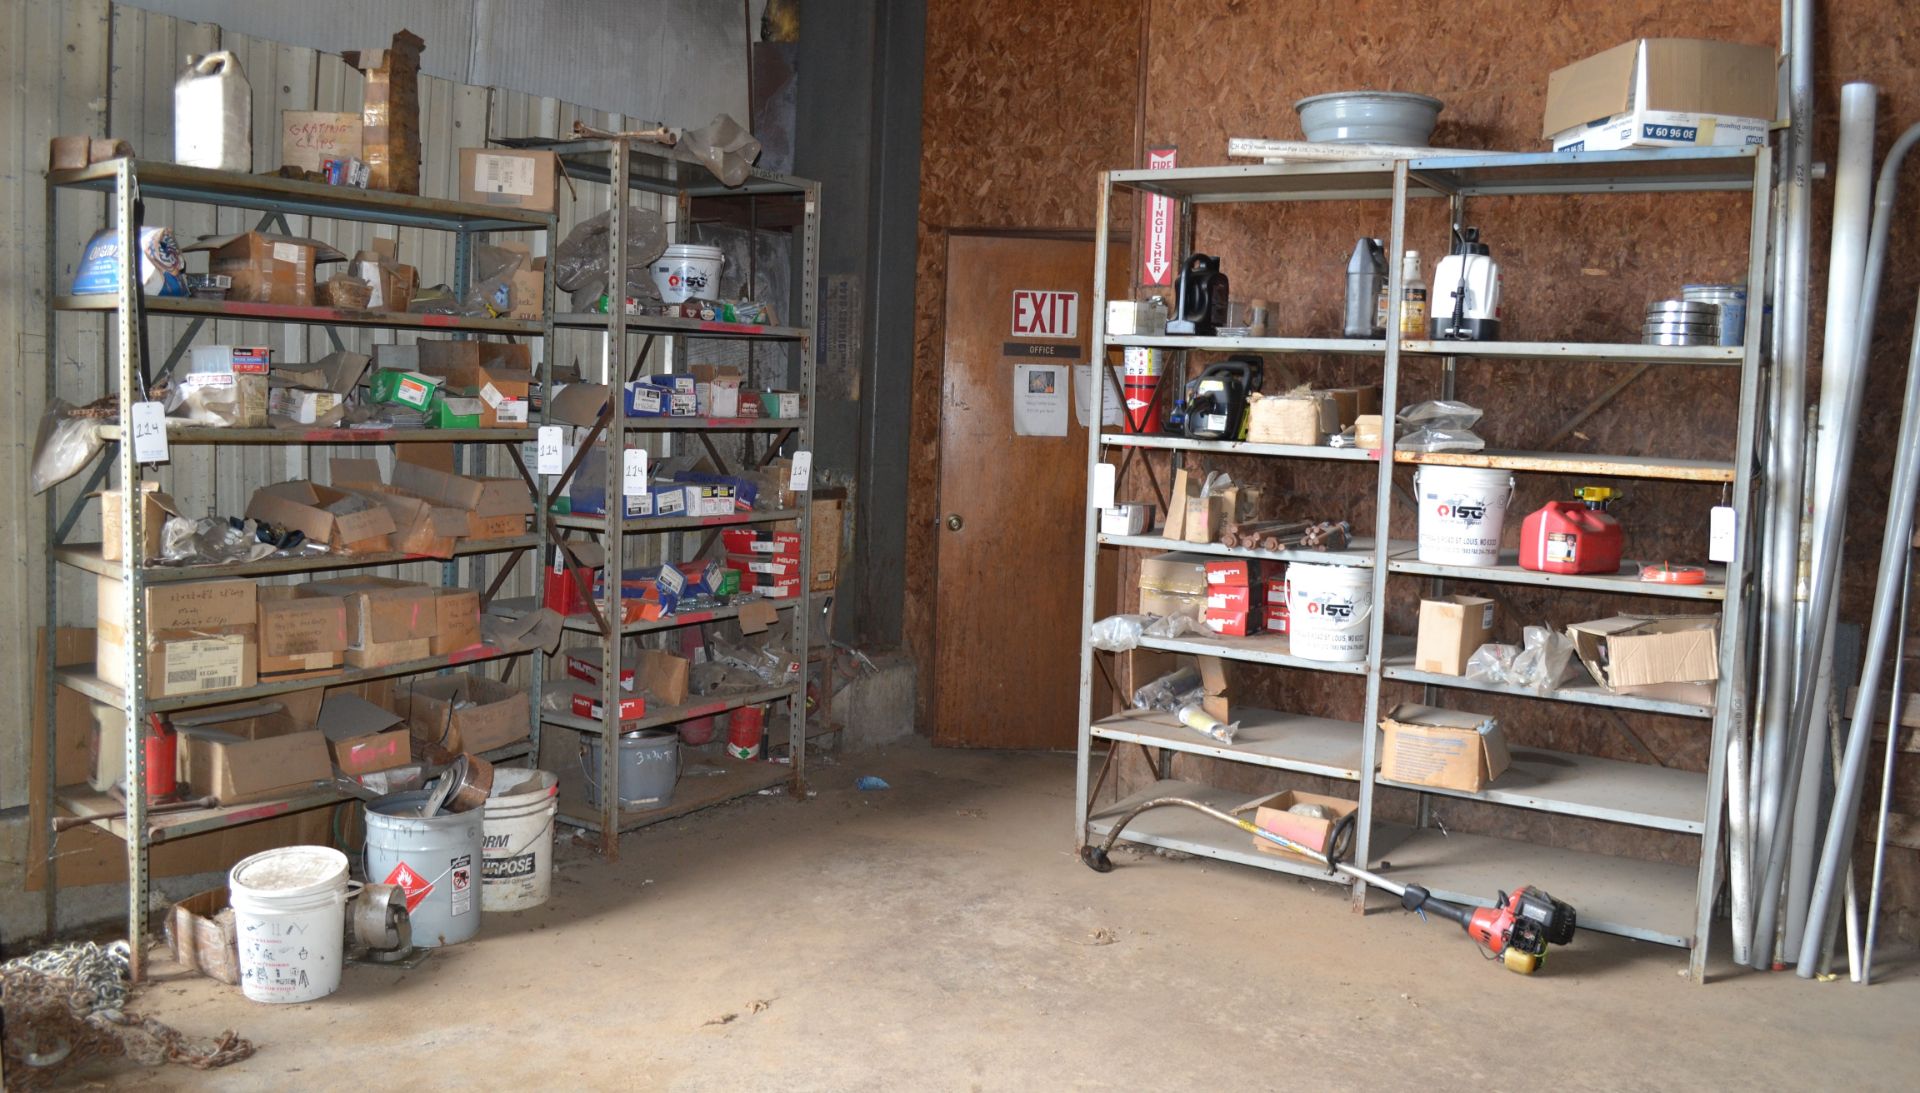 Lot Consisting of (3) Section Metal Shelving With Contents Including But Not Limited To: Poulan